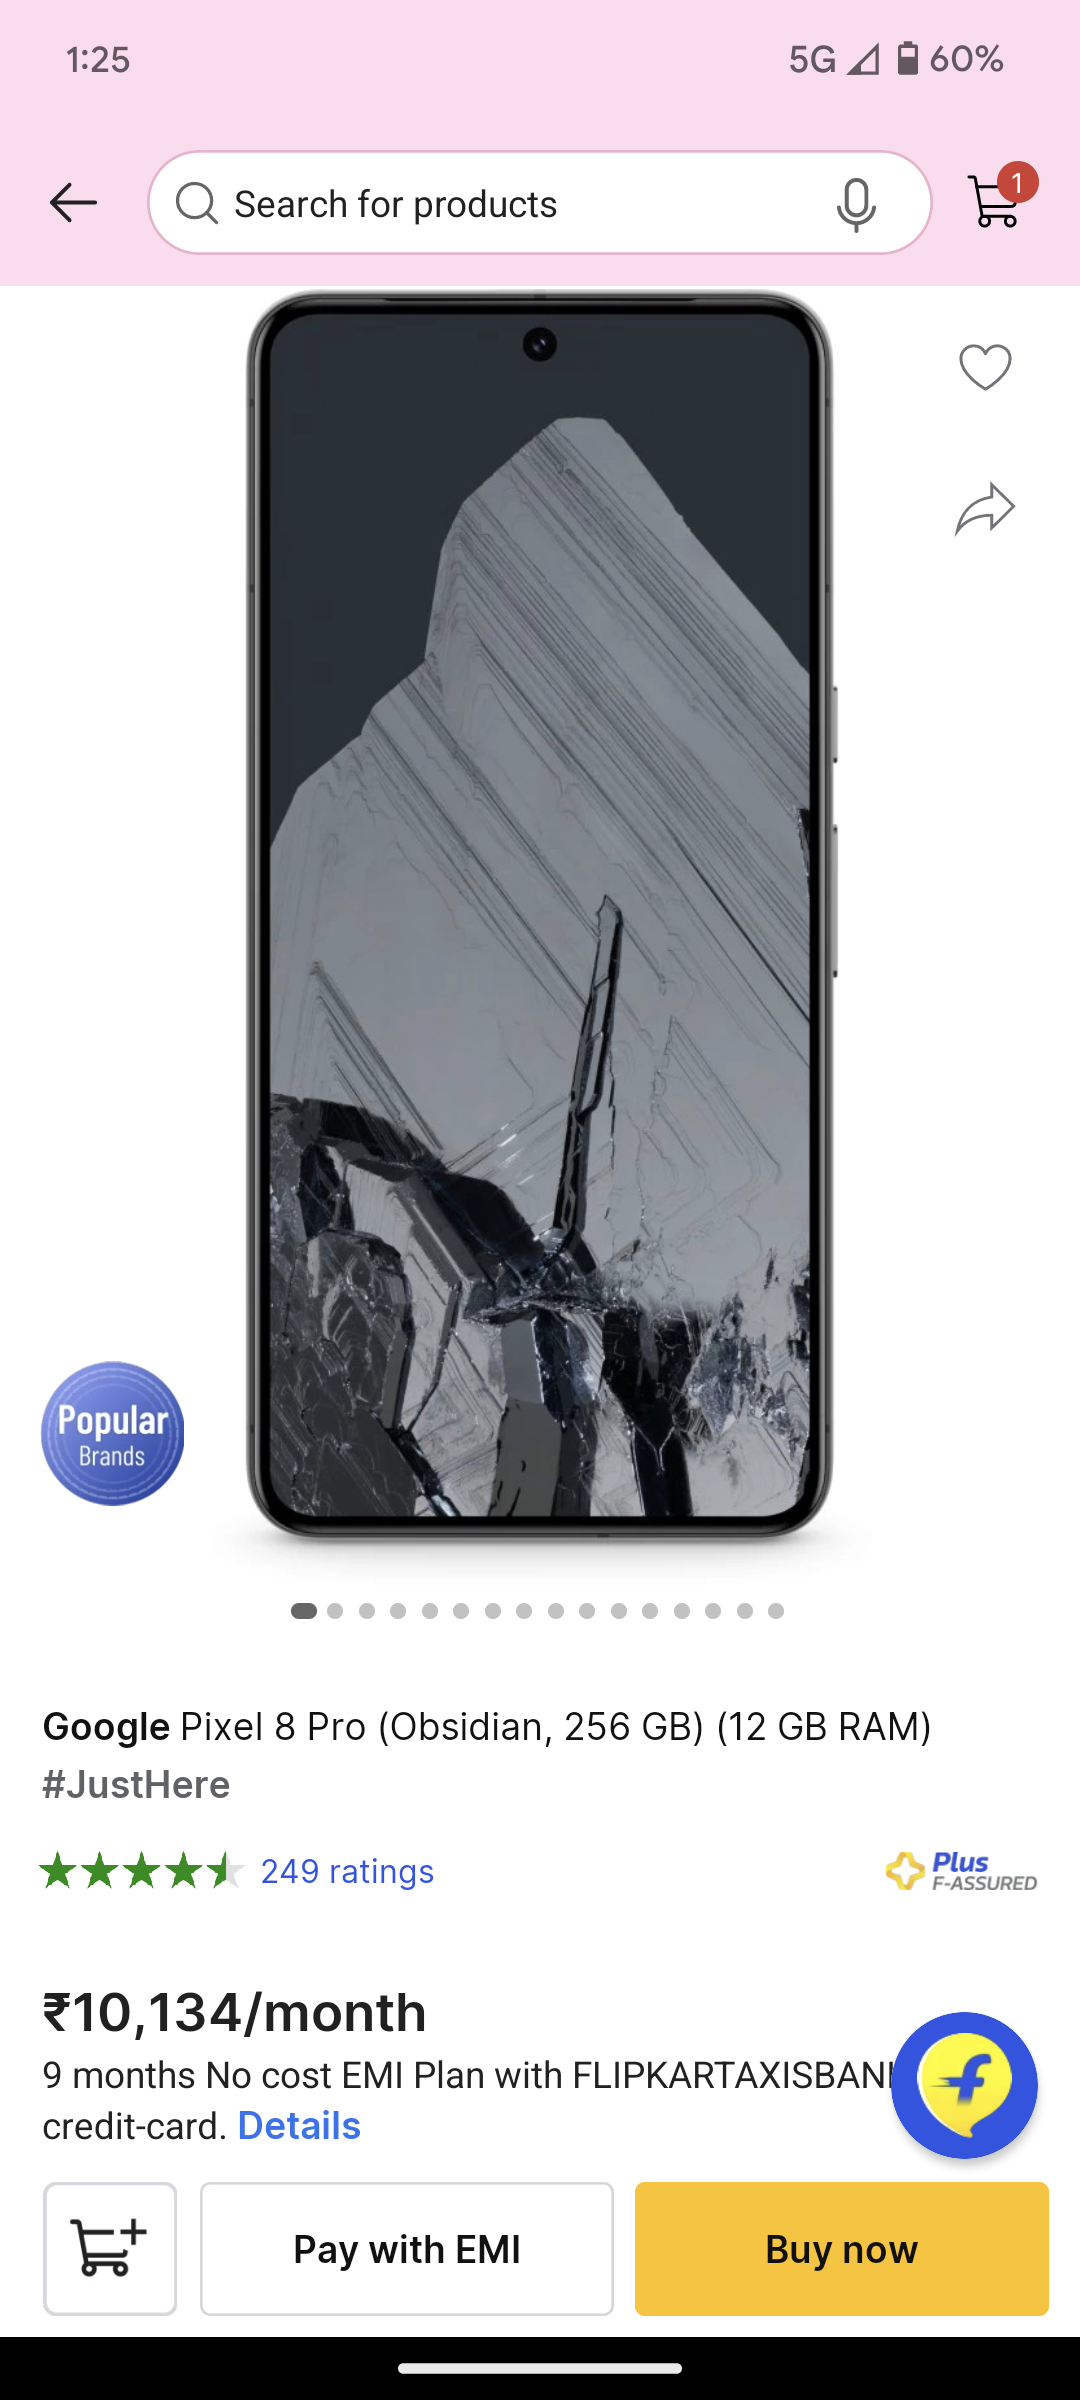 Google Pixel 8 Pro 256GB variant is now available in India